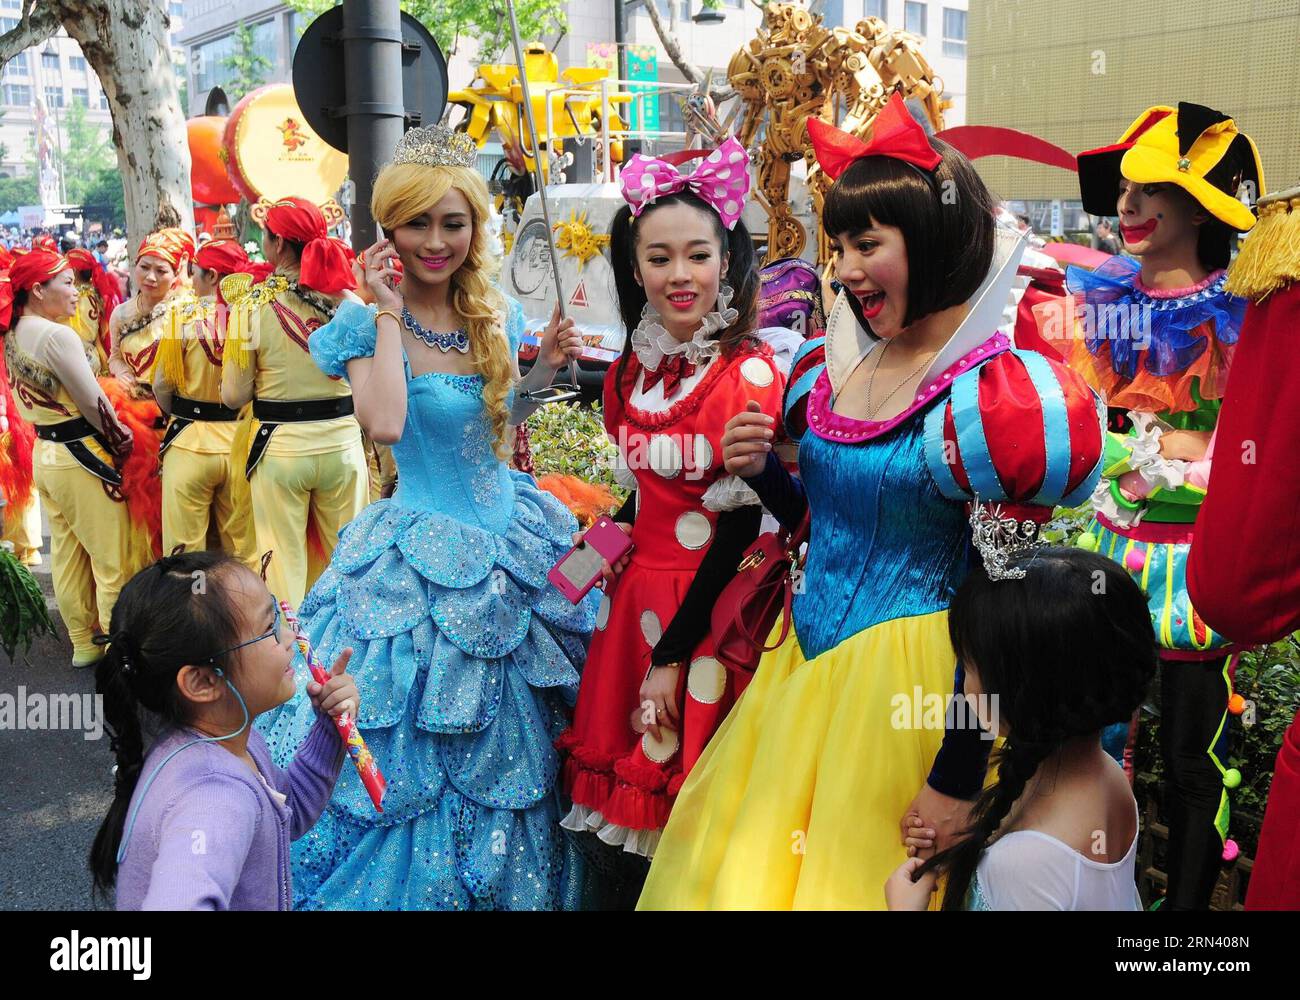 (150501) -- HANGZHOU, May 1, 2015 -- Performers in costumes talk with a girl in a parade during the 11th China International Cartoon & Animation Festival in Hangzhou, capital of east China s Zhejiang Province, May 1, 2015. ) (wyo) CHINA-HANGZHOU-ANIMATION FESTIVAL (CN) LianxGuoqing PUBLICATIONxNOTxINxCHN   Hangzhou May 1 2015 Performers in Costumes Talk With a Girl in a Parade during The 11th China International Cartoon & Animation Festival in Hangzhou Capital of East China S Zhejiang Province May 1 2015 wyo China Hangzhou Animation Festival CN  PUBLICATIONxNOTxINxCHN Stock Photo